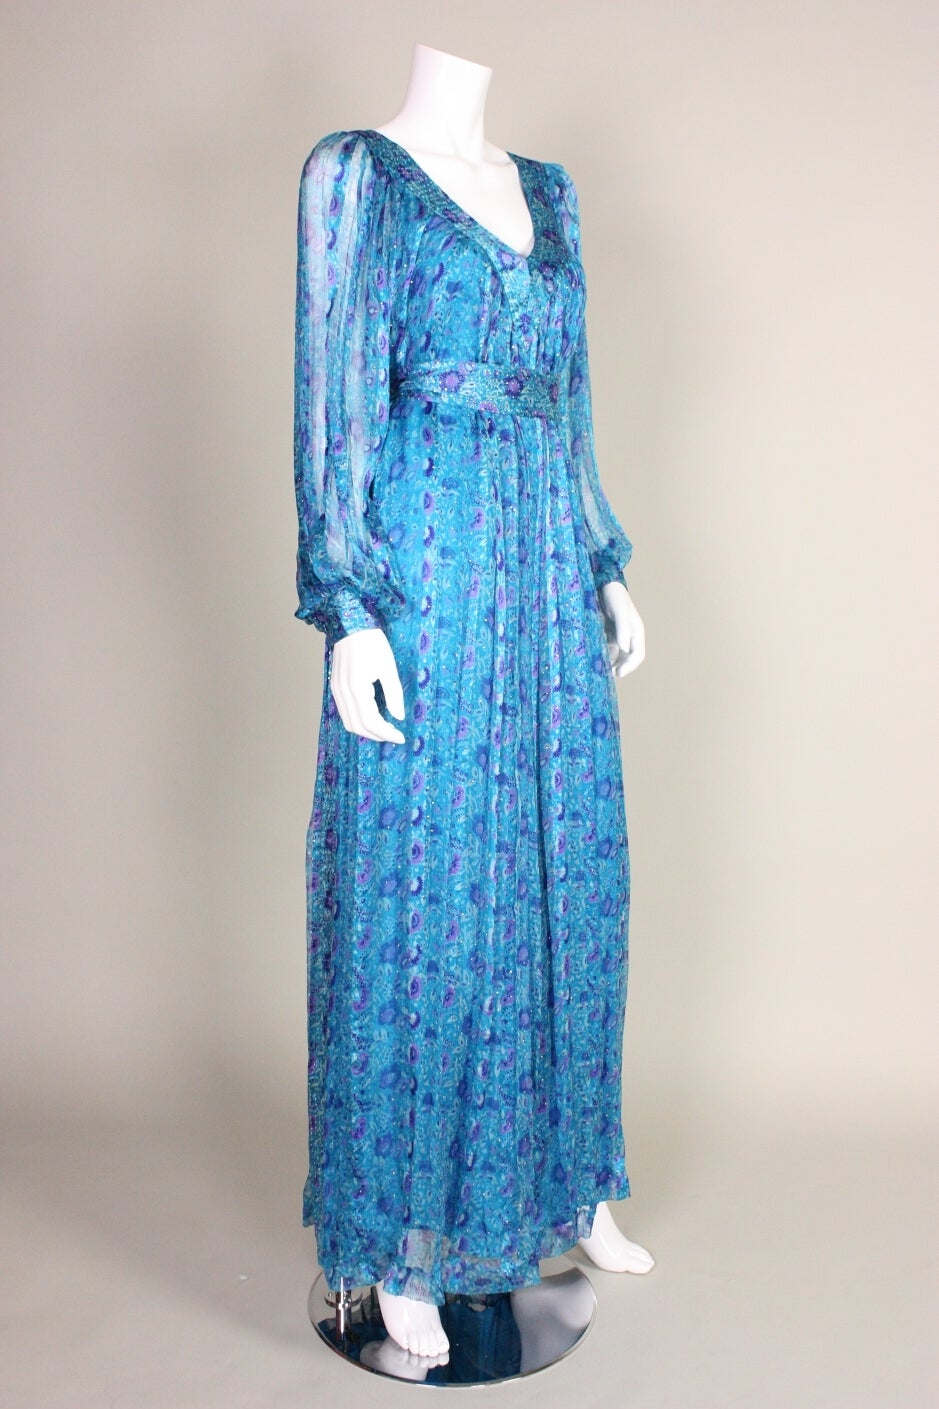 Vintage maxi dress from Raksha retailed at I. Magnin and dates to the 1970's. It is made of turquoise silk chiffon with a floral print and tiny pieces of metal clamped in (like an assuit). V neckline. Lined except for in sleeves. Center back zipper